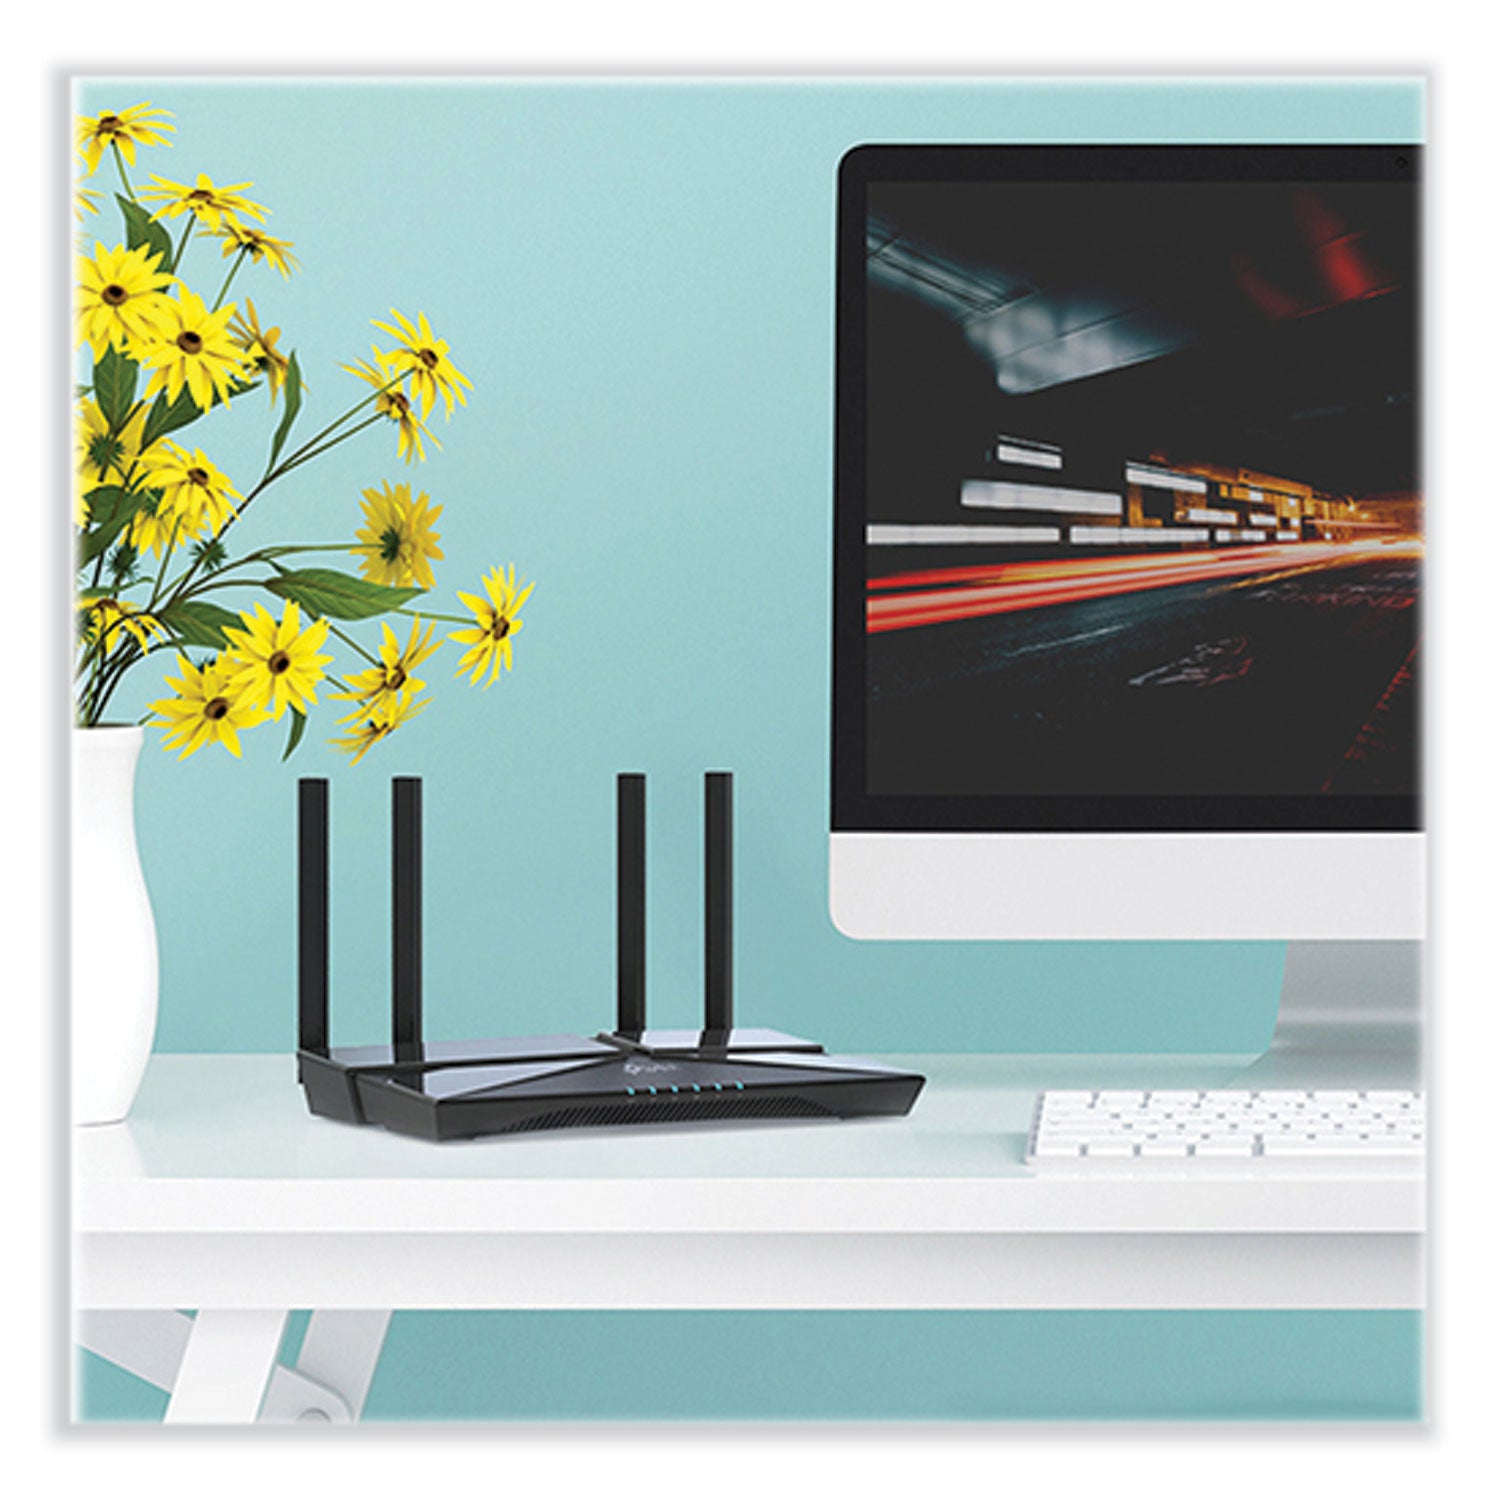 archer-ax1500-wireless-and-ethernet-router-5-ports-dual-band-24-ghz-5-ghz_tplarcherax1500 - 8